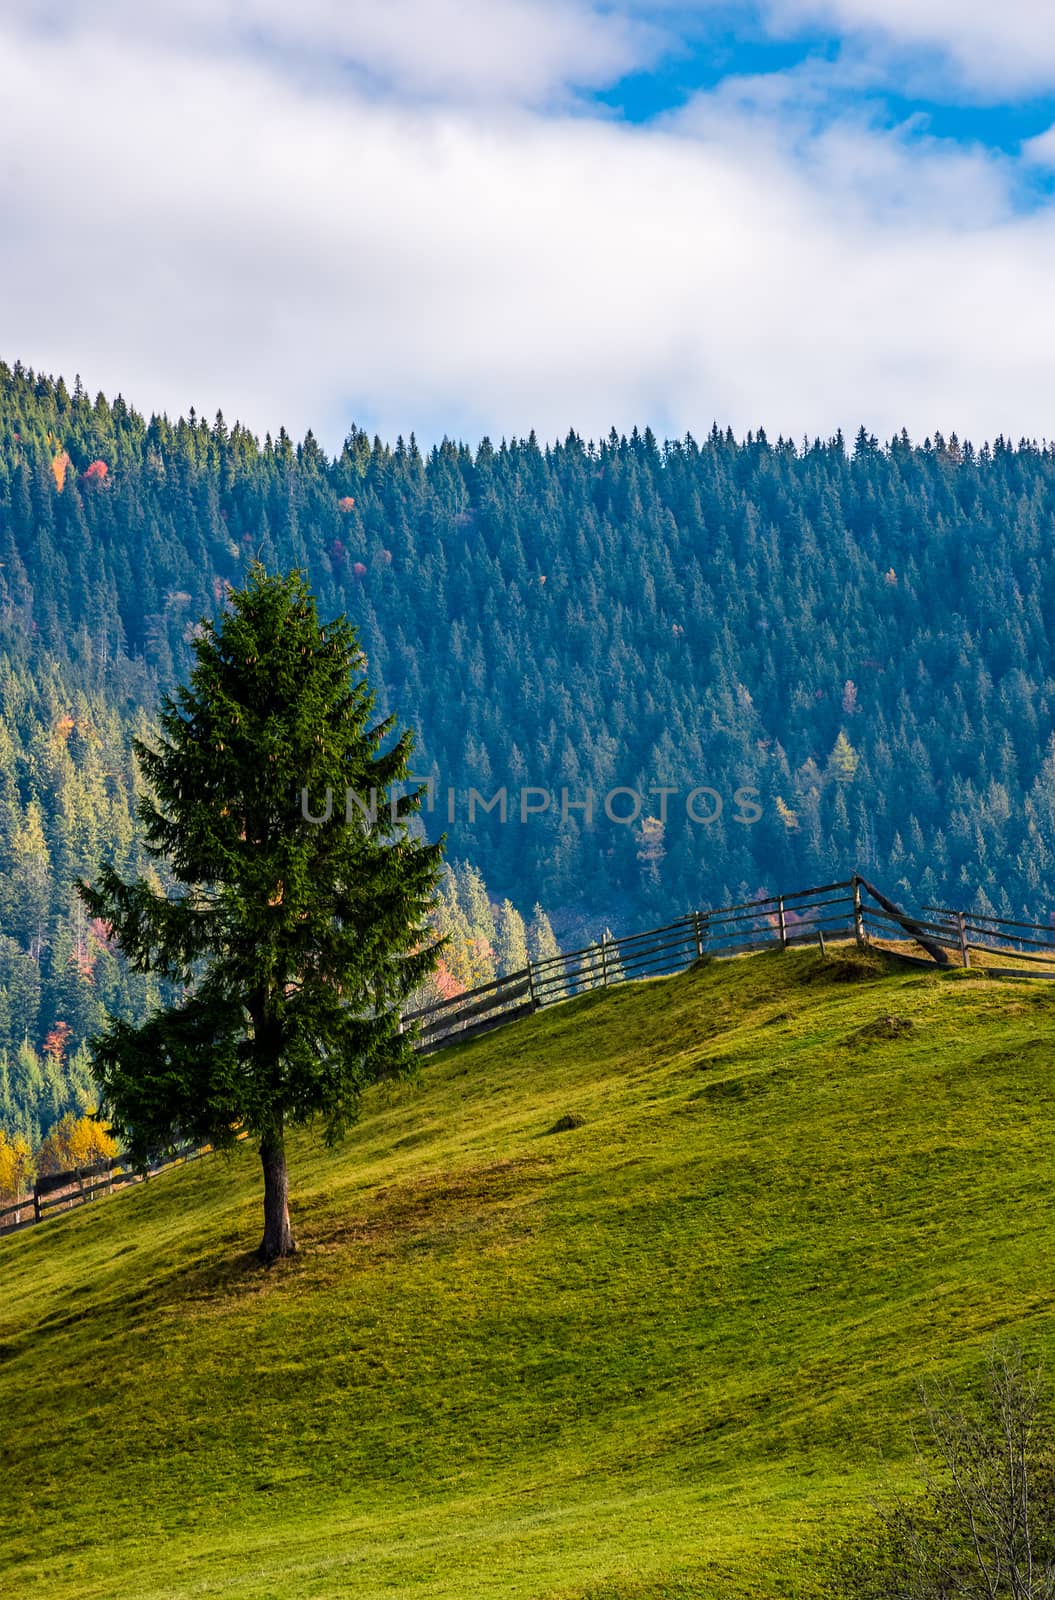 spruce tree on grassy hillside in autumn. lovely sunny afternoon in mountainous rural area